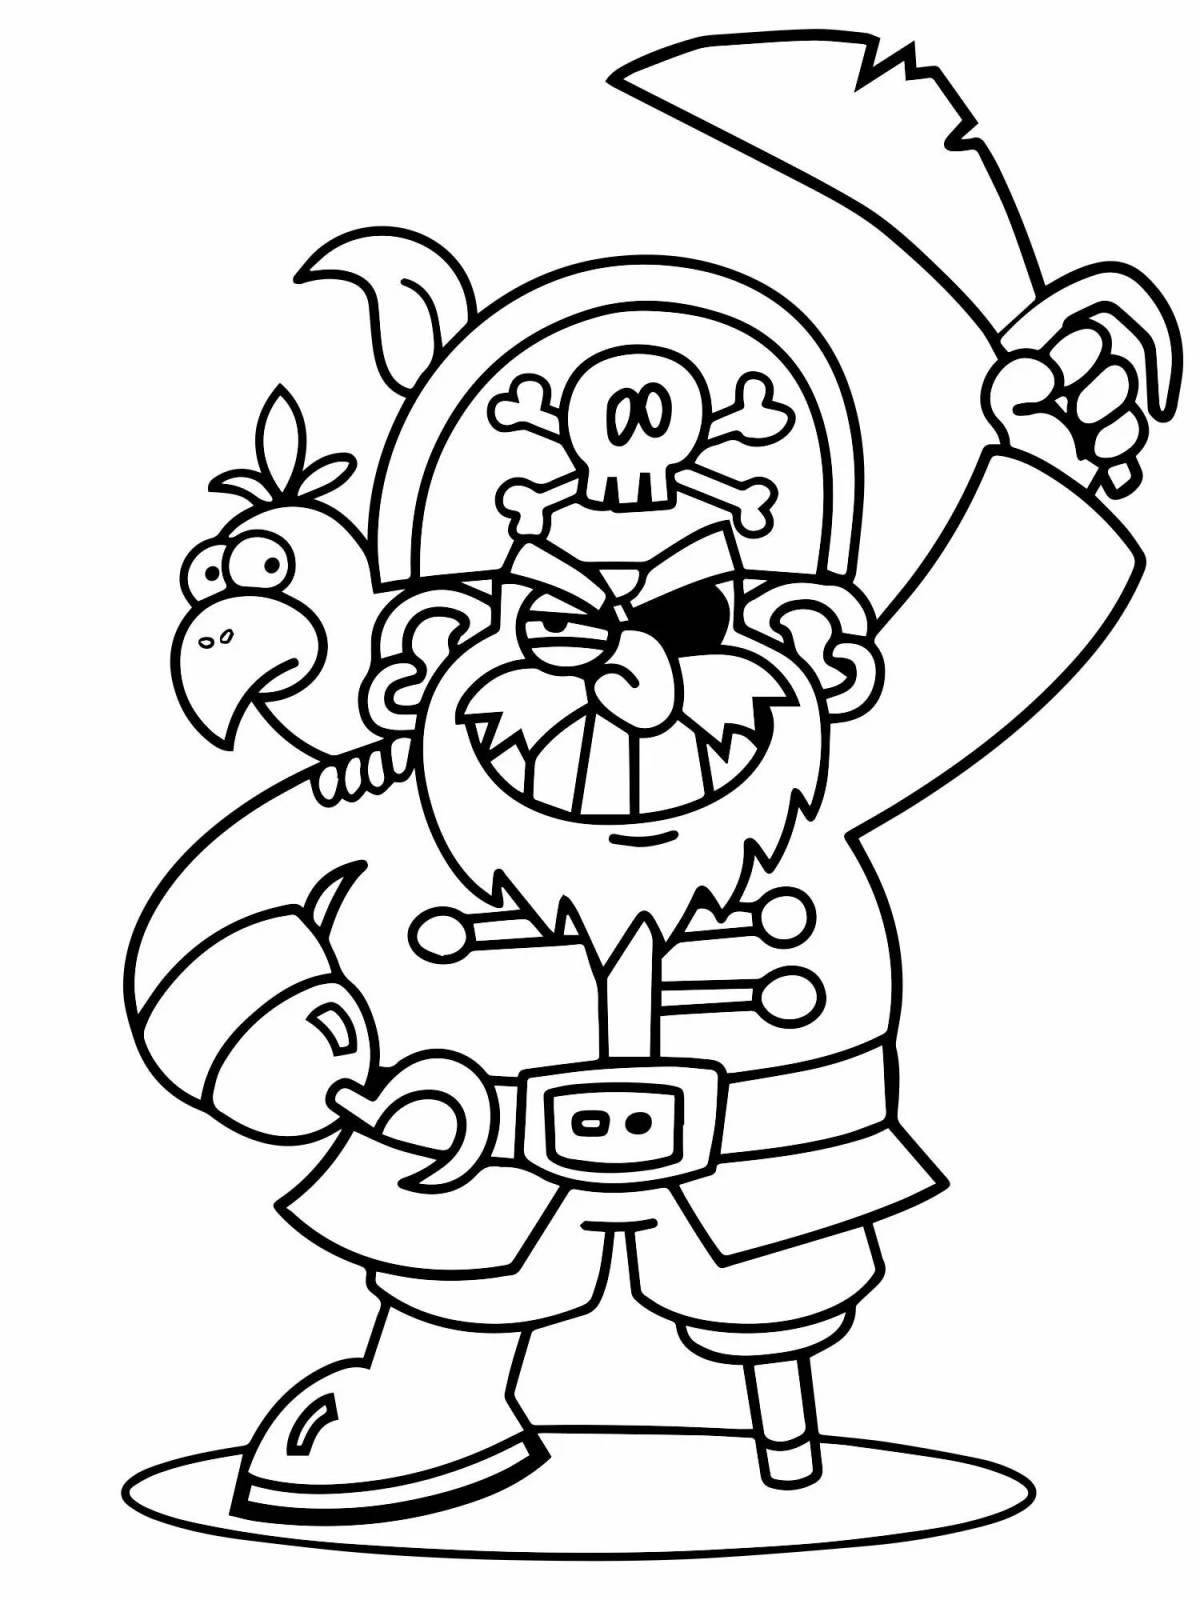 Bright pirate coloring book for kids